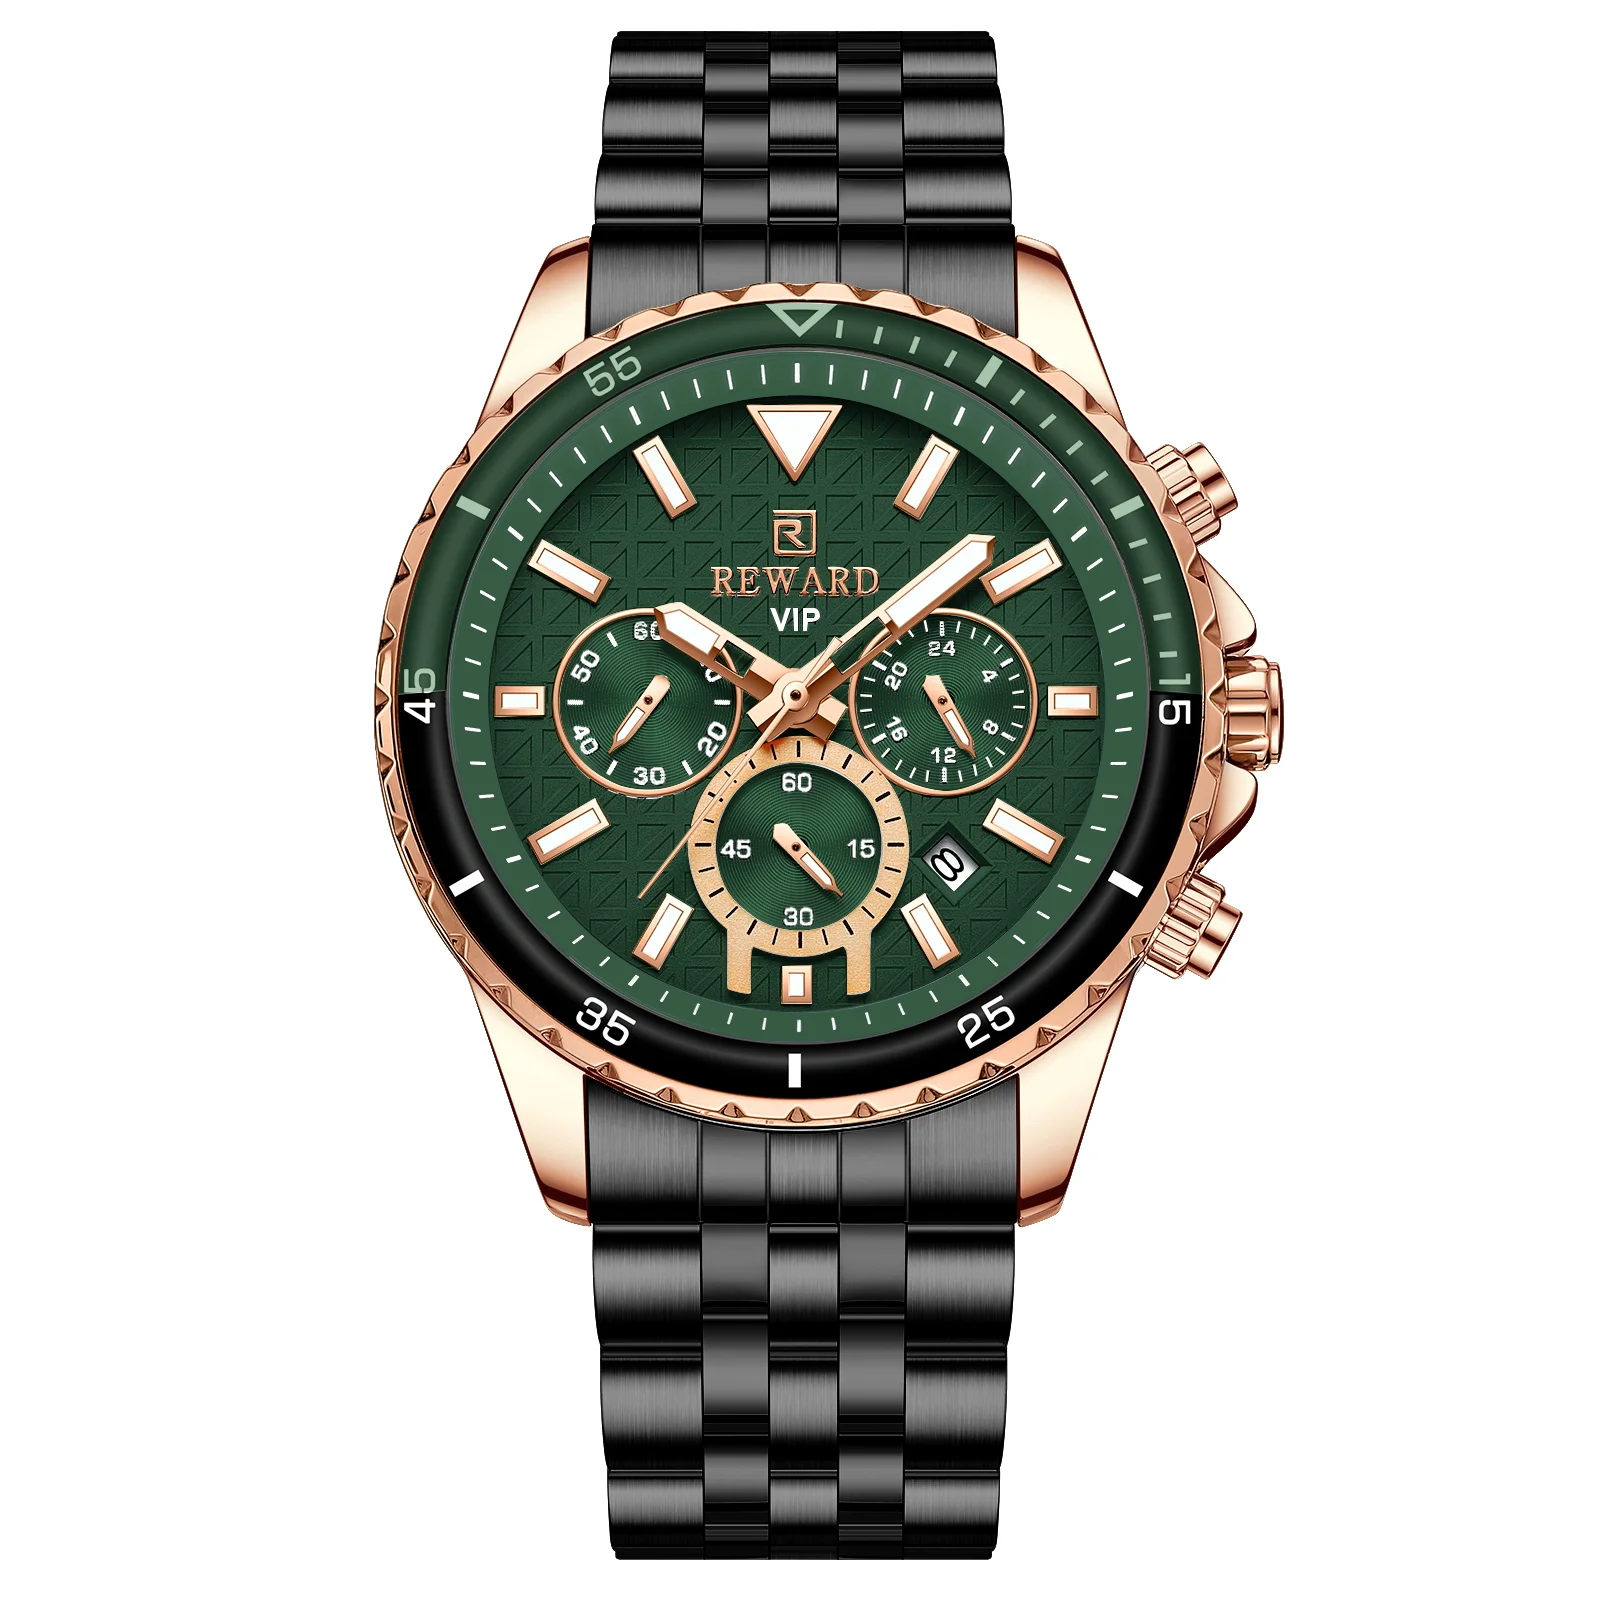 Reward Watch Suppliers  your best partner and offers you the best price RD81101M